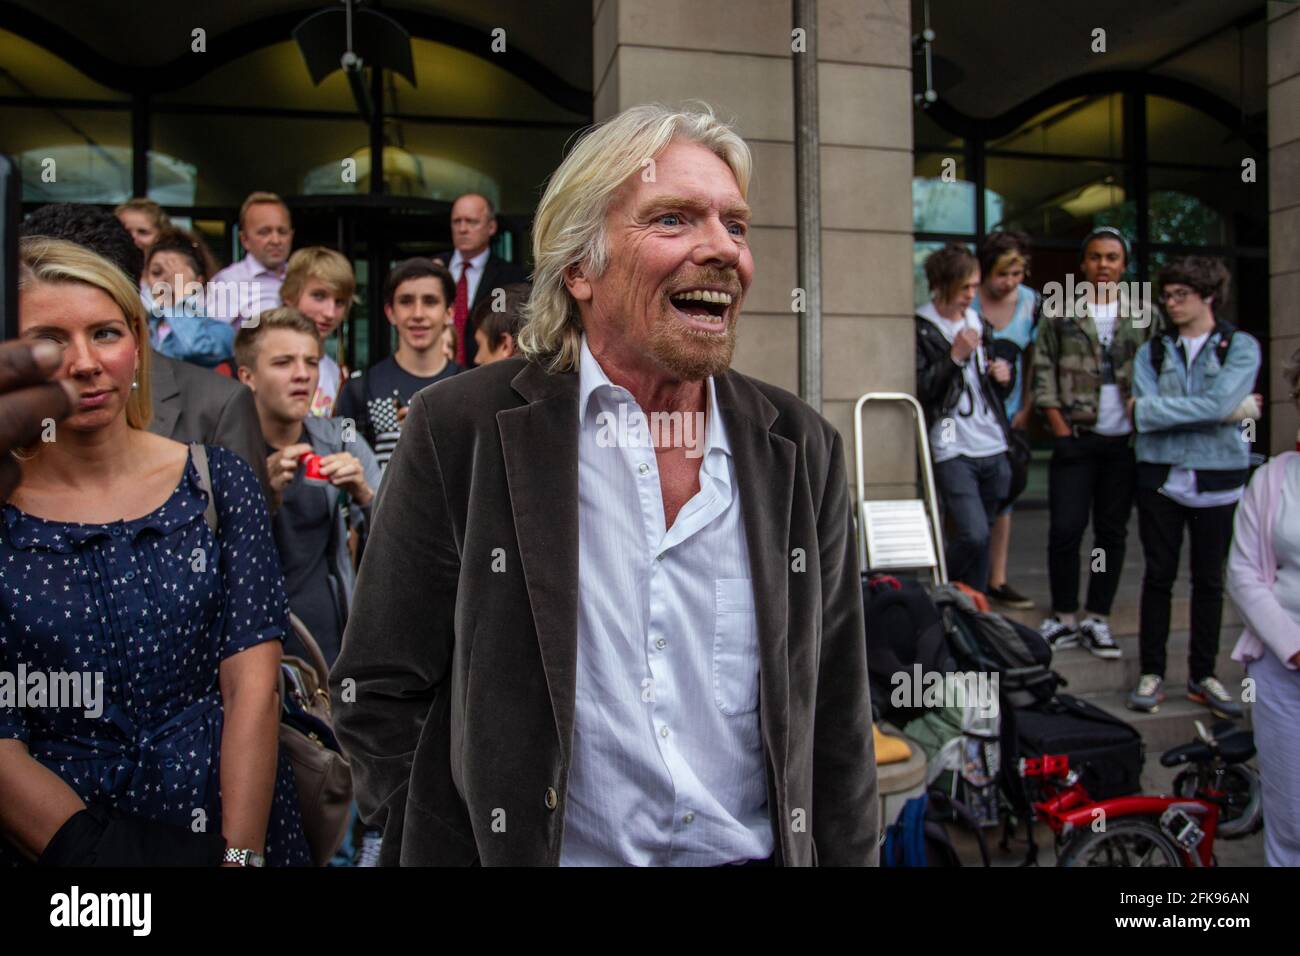 Sir Richard Branson, Chairman of Virgin Group at Portcullis House to be questioned by The Transport Select Committee about the West Coast train line. Stock Photo